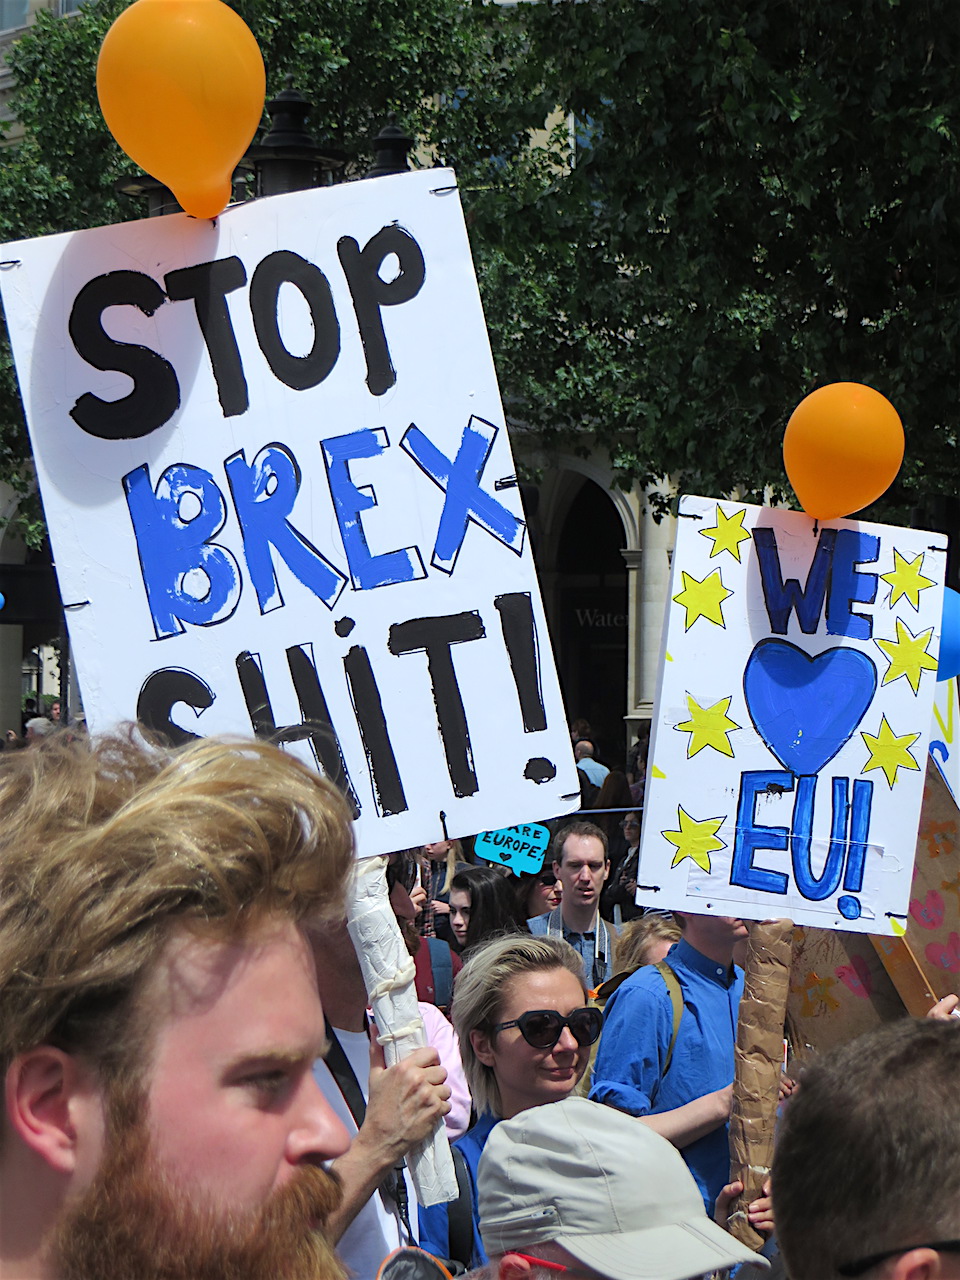 Stop-Brex-sh*t: a placard from the March for Europe in London on July 2, 2016 (Photo: Andy Worthington).